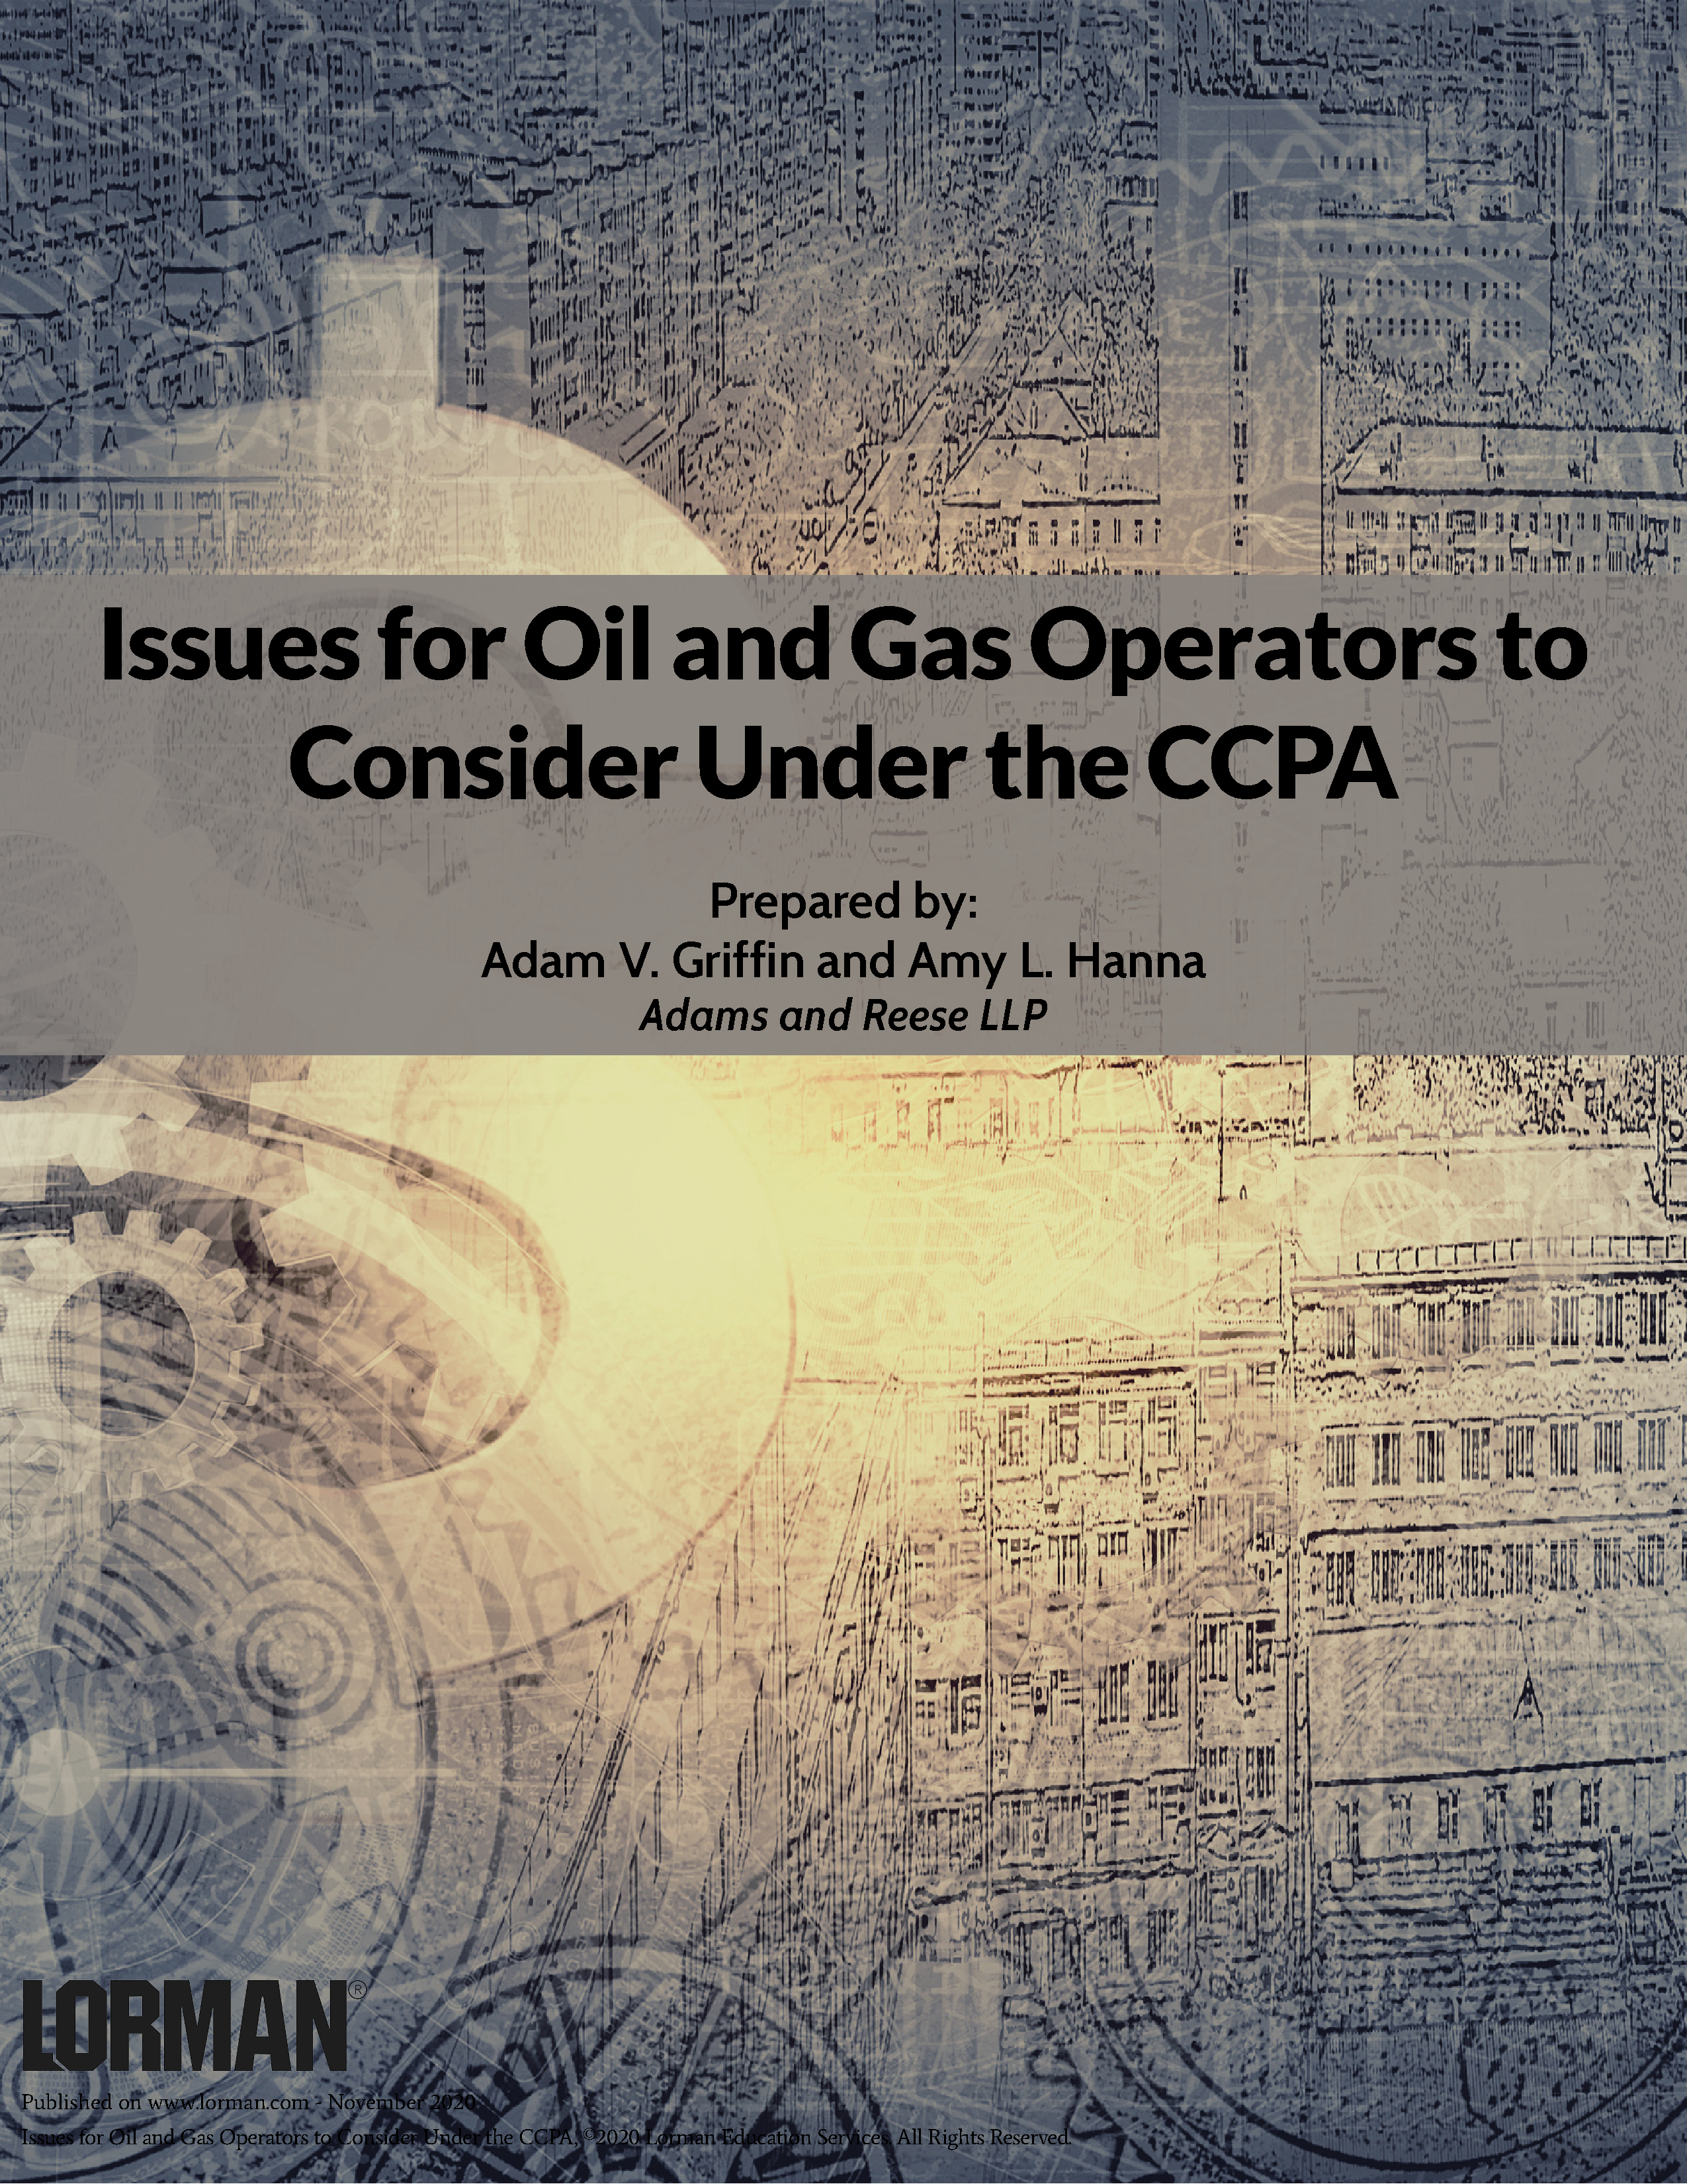 Issues for Oil and Gas Operators to Consider Under the CCPA